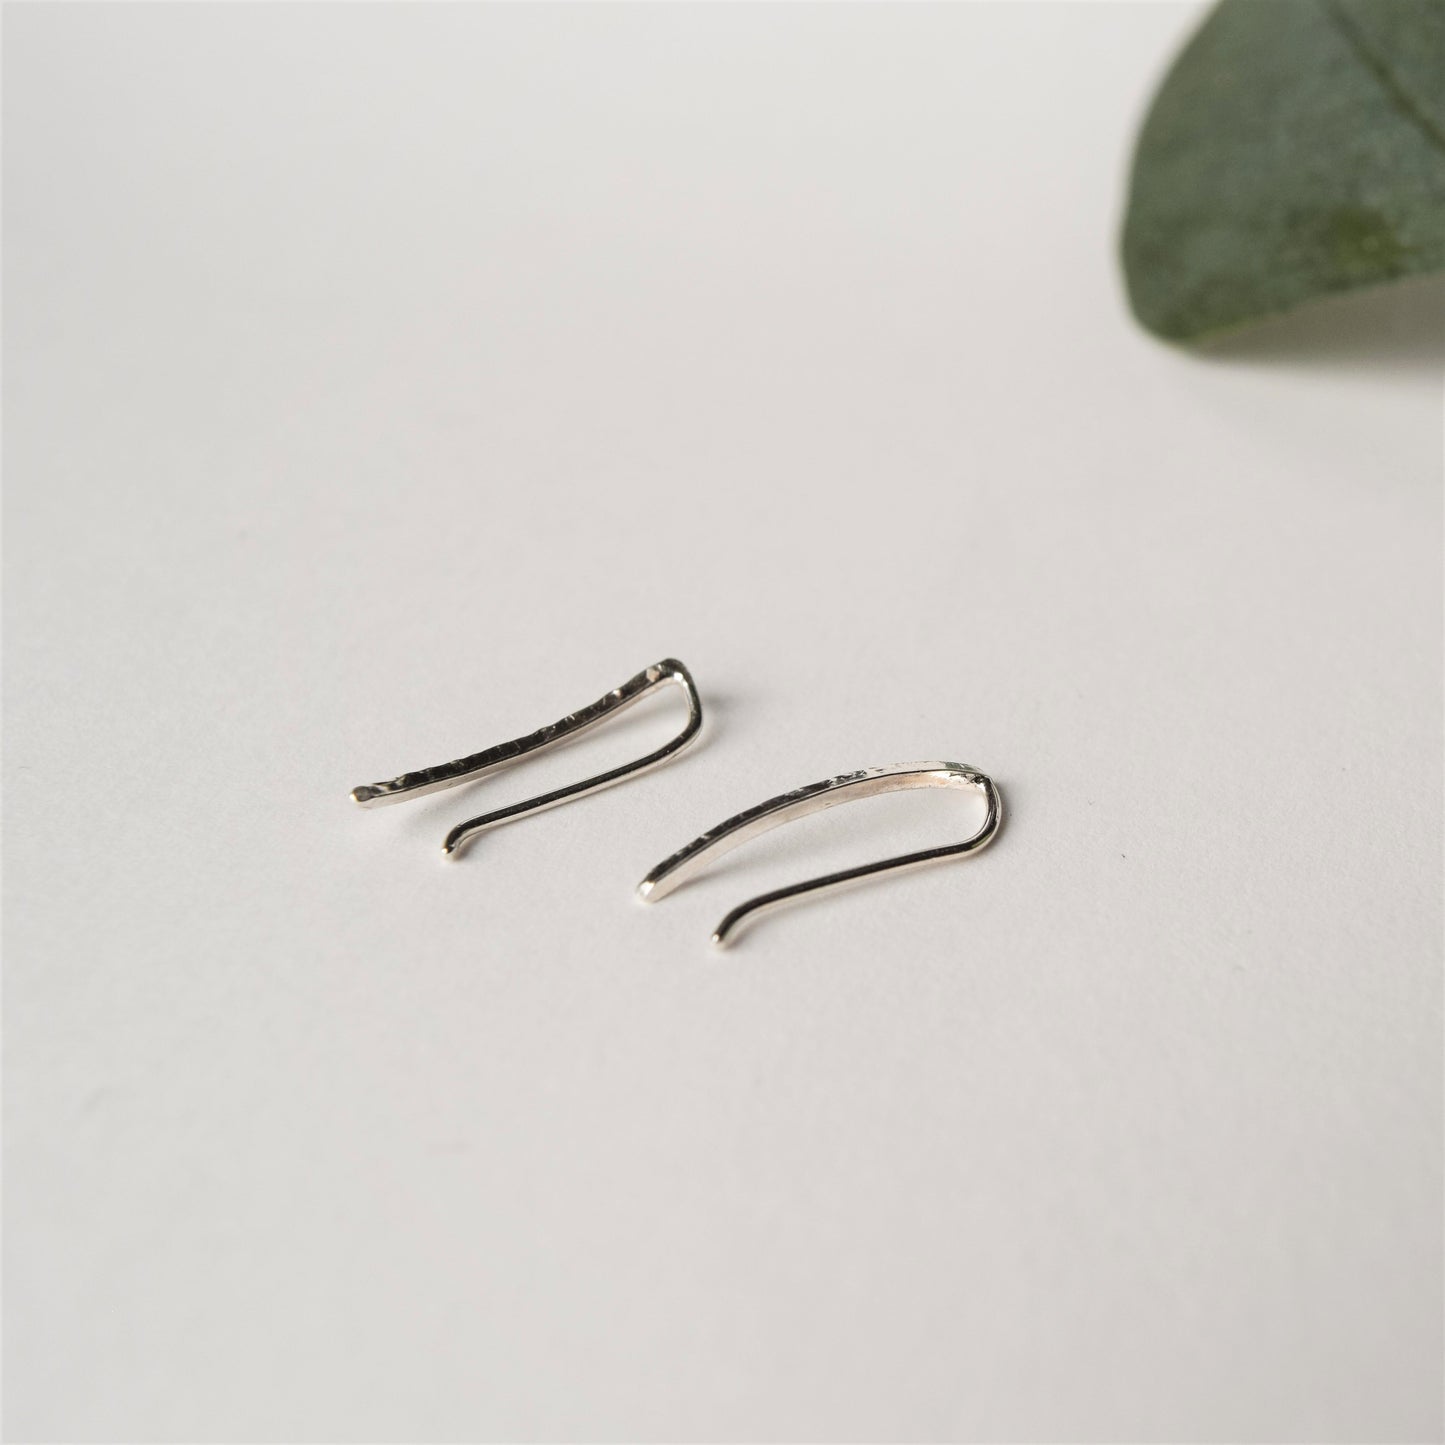 Product image showing smooth ear climbers on white background